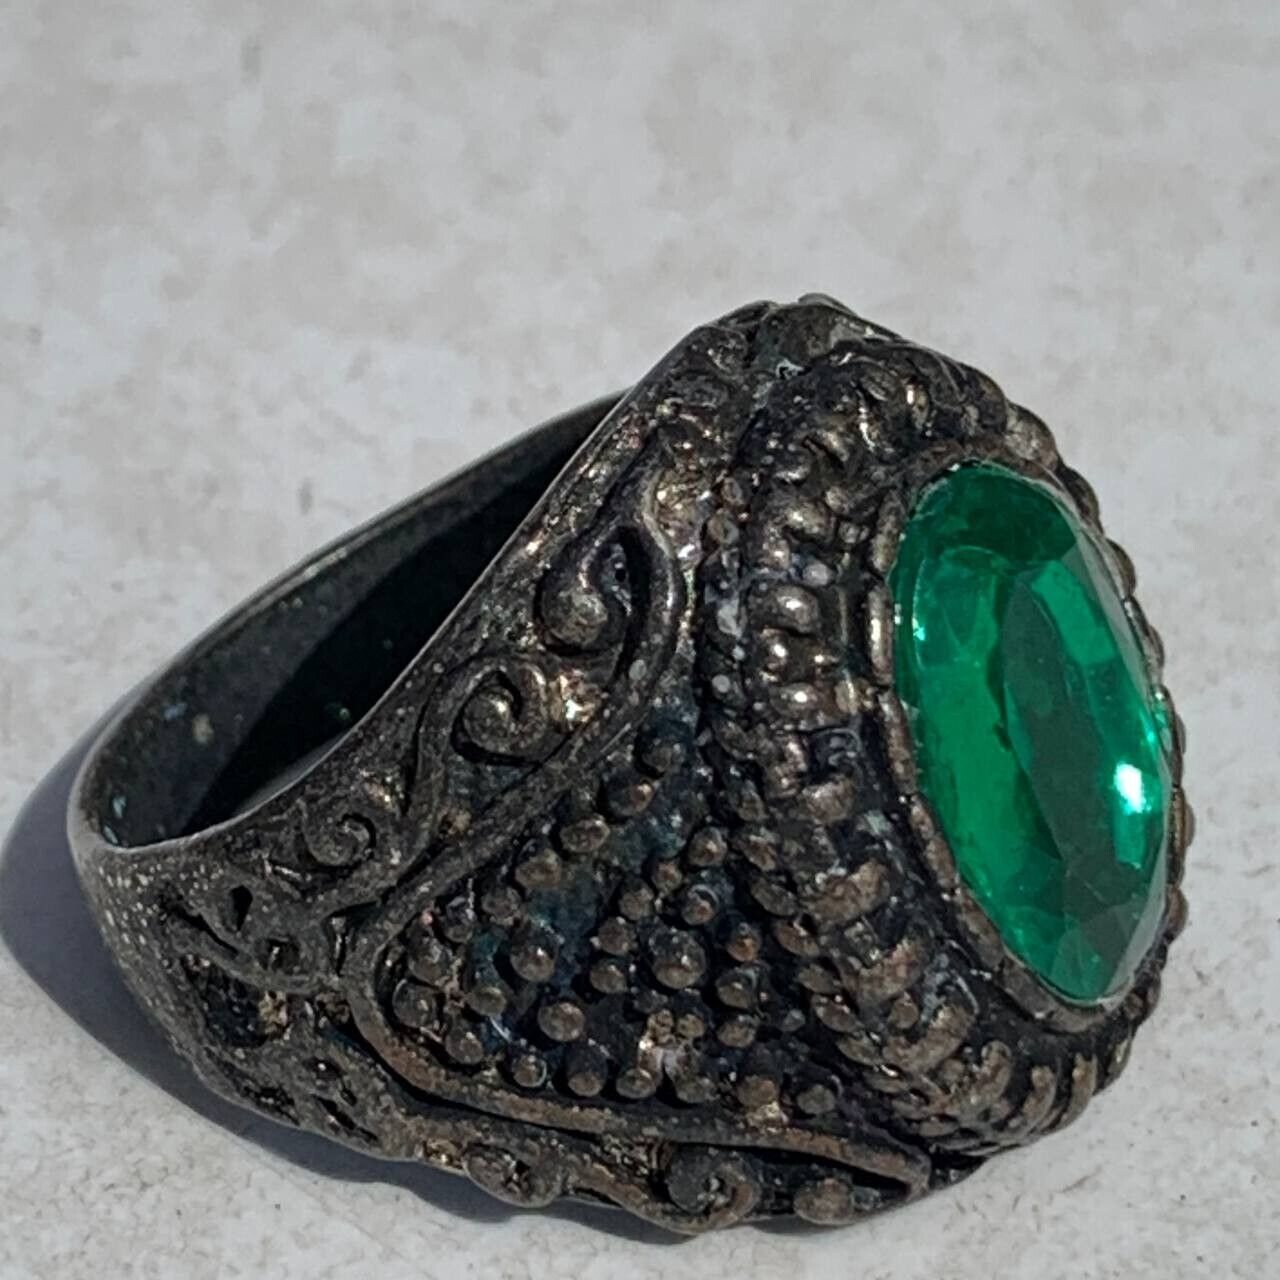 VERY RARE ANCIENT SILVER VIKING RING WITH GREEN STONE AMAZING ARTIFACT AUTHENTIC